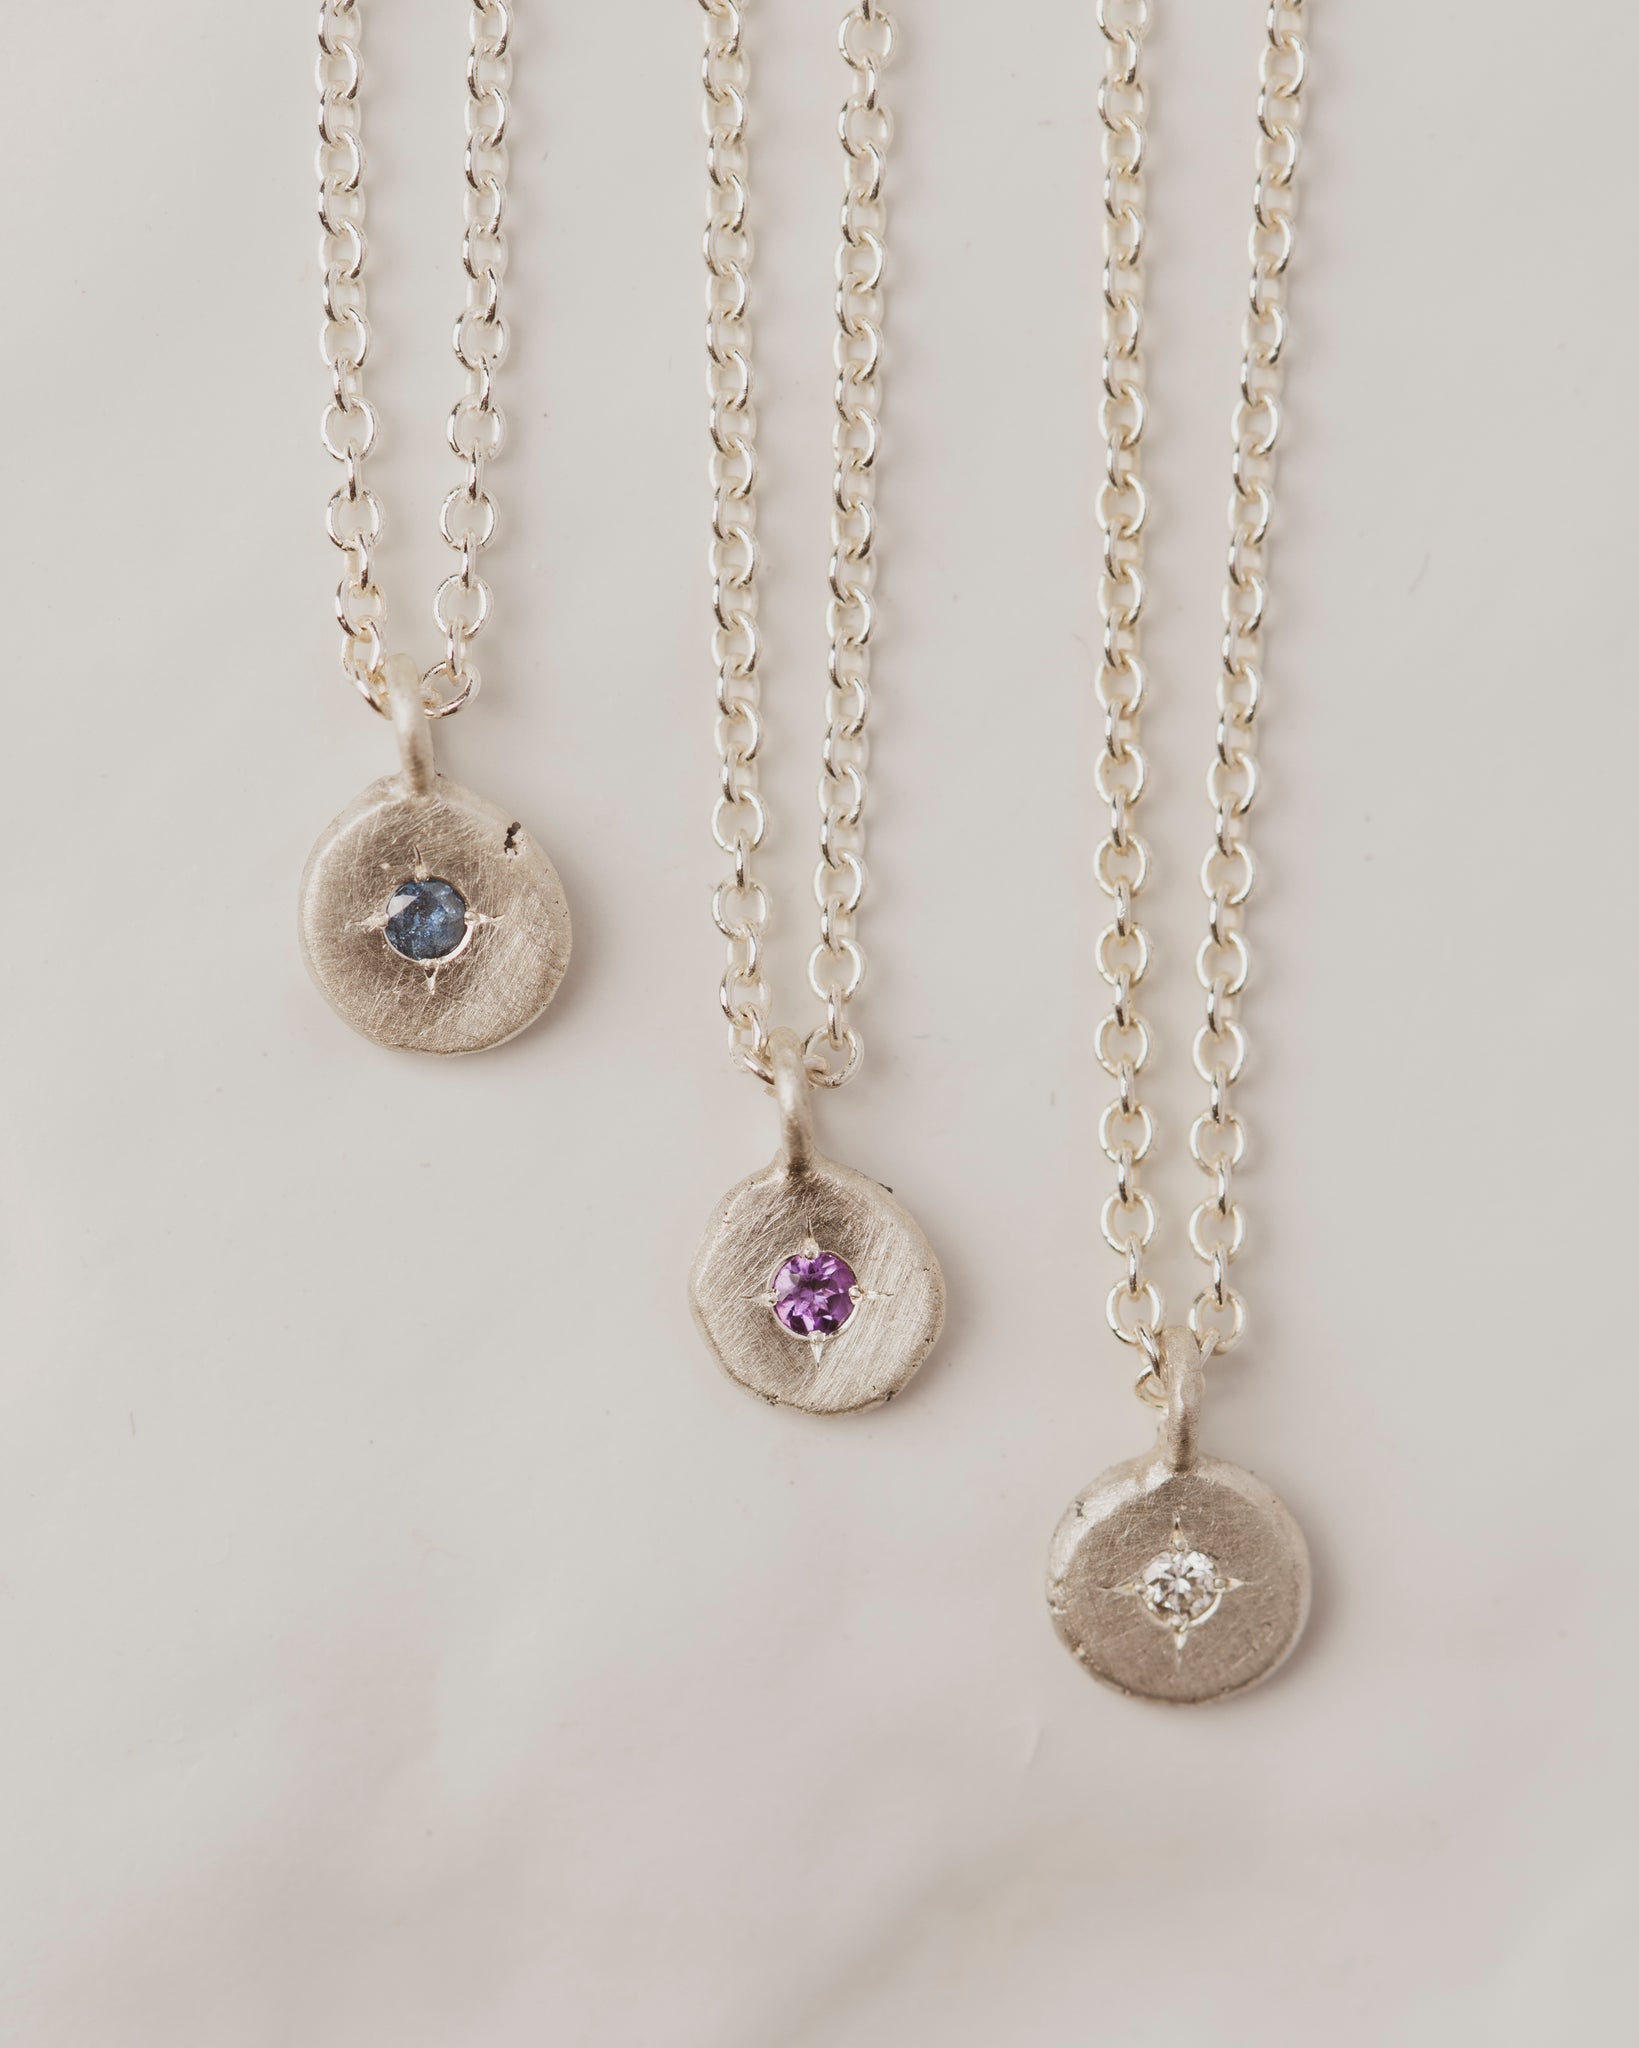 These sterling silver pebble gemstone necklaces have a 2mm diamond, sapphire, or amethyst in the center.